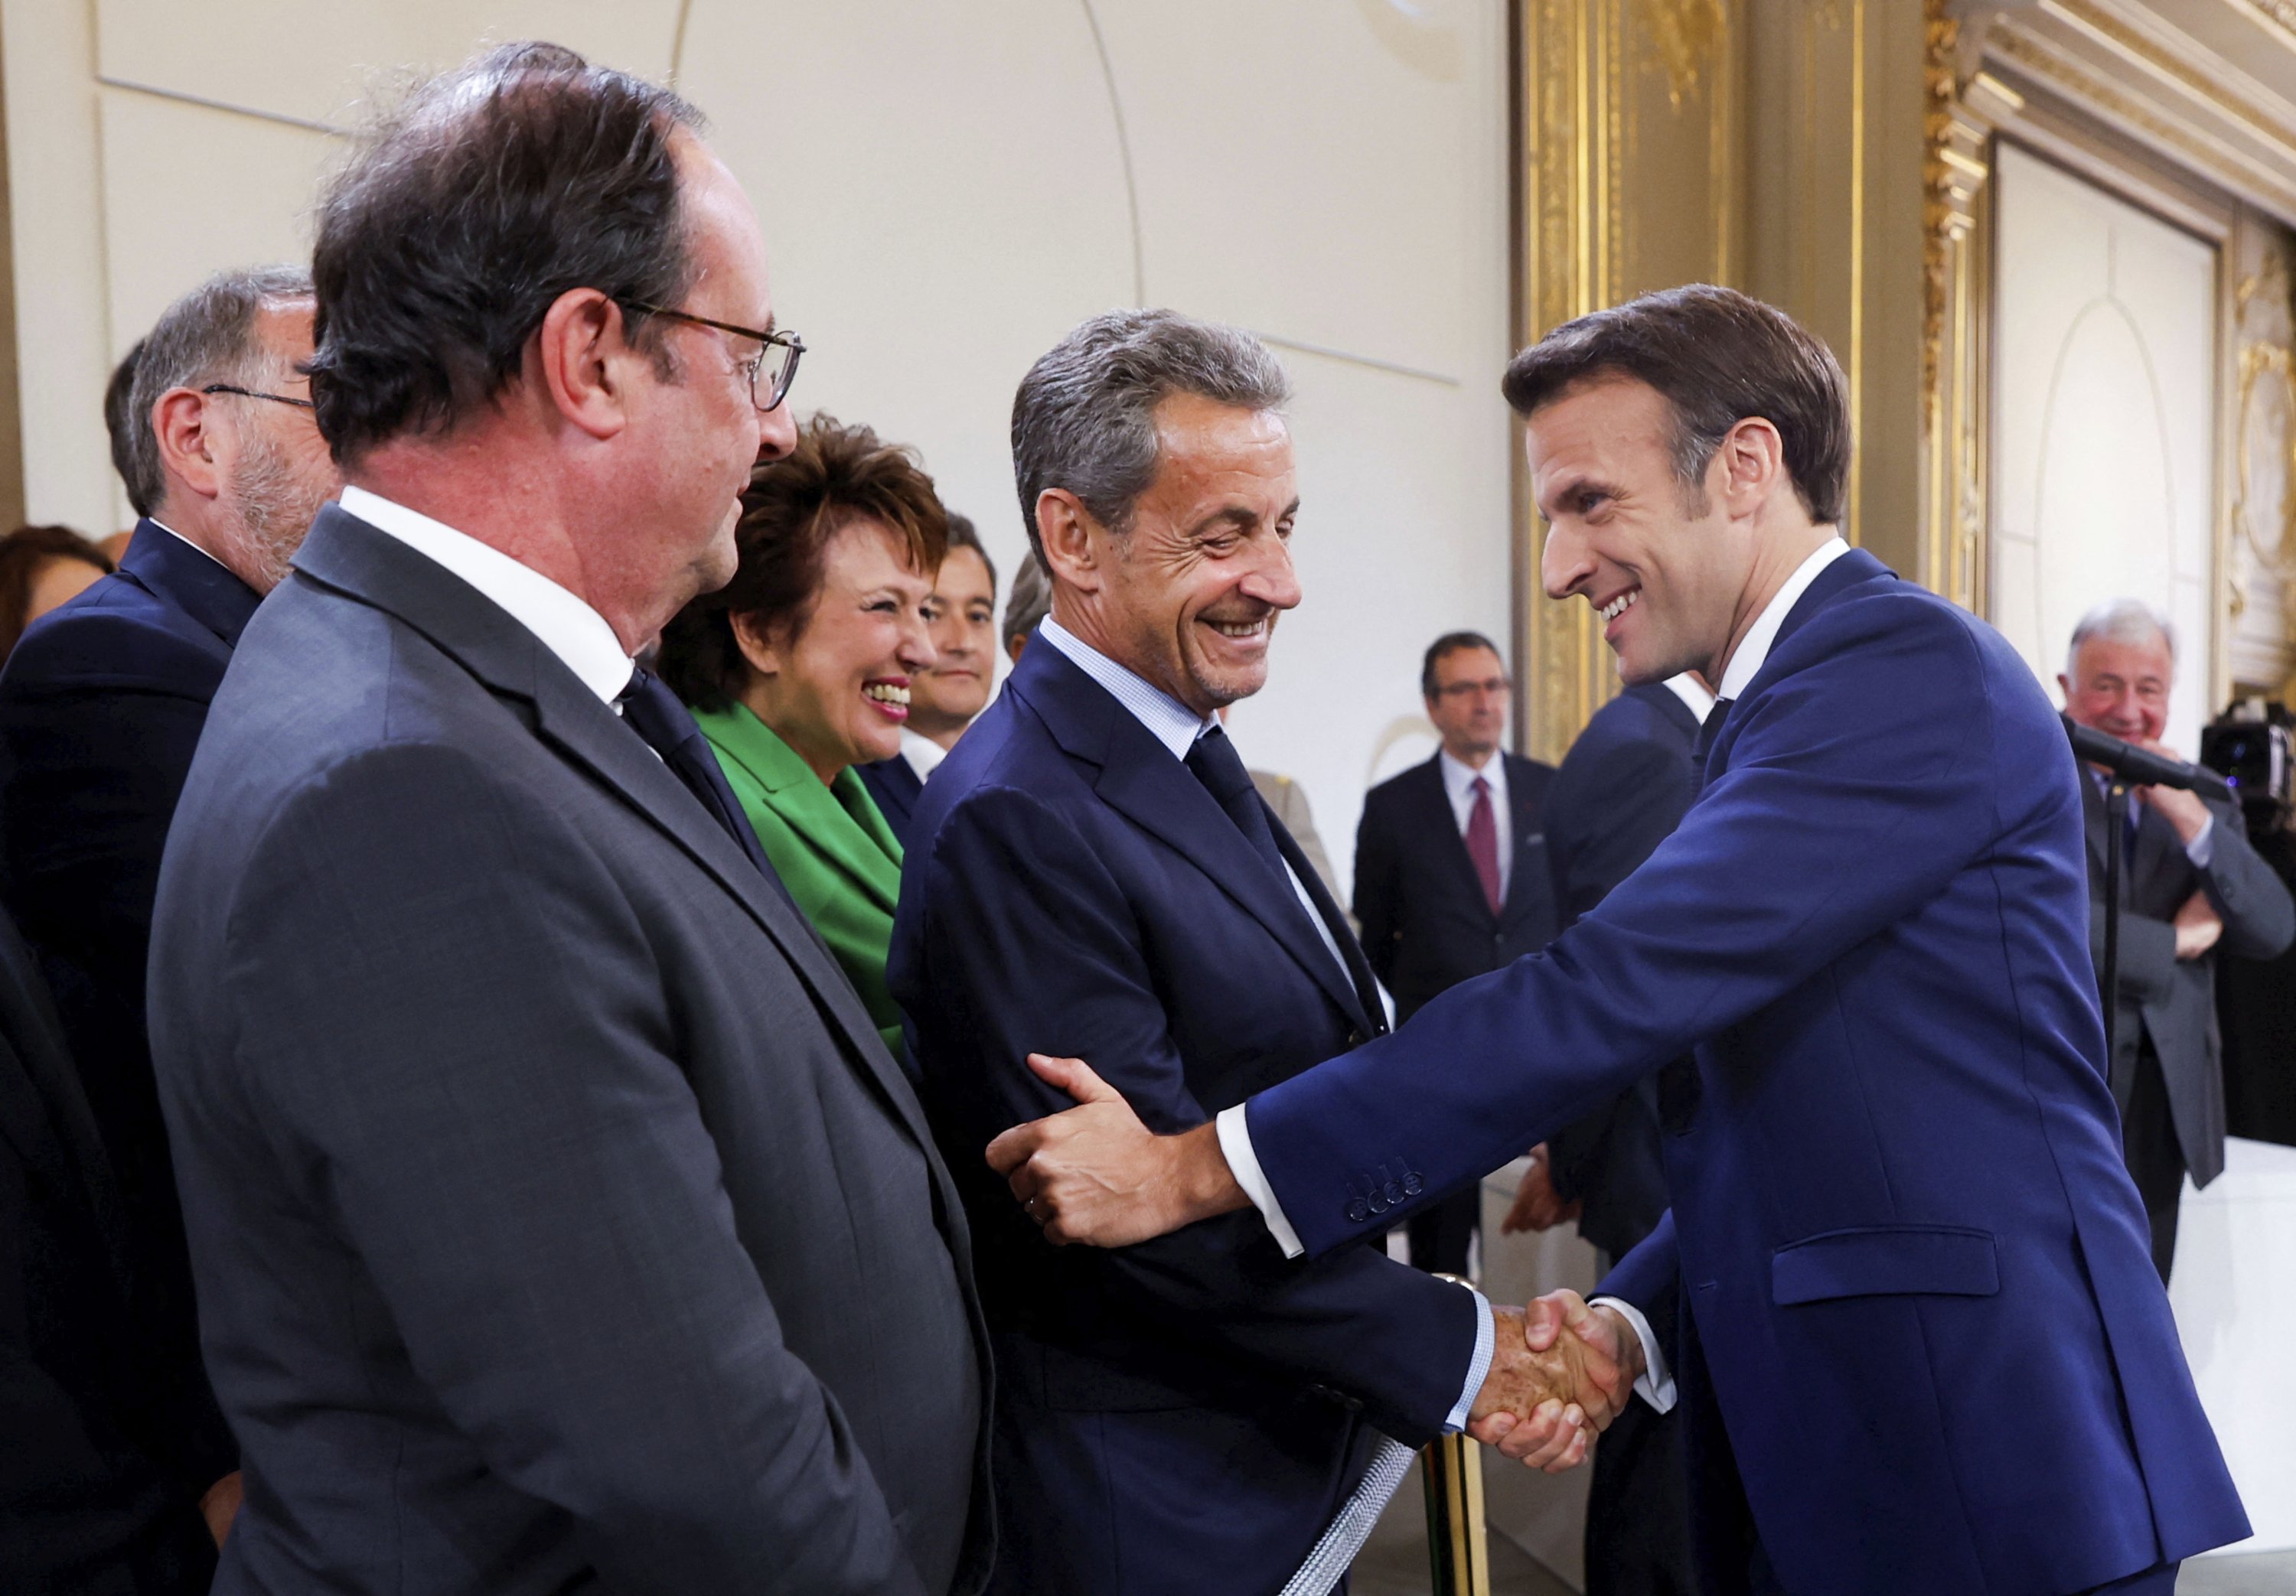 France's former President Francois Hollande (L) looks on as France's former President Nicolas Sarkozy (C) shakes hands with French President Emmanuel Macron during the ceremony of his inauguration for a second term at the Elysee Palace in Paris, France, May 7, 2022 shakes (AP photo)